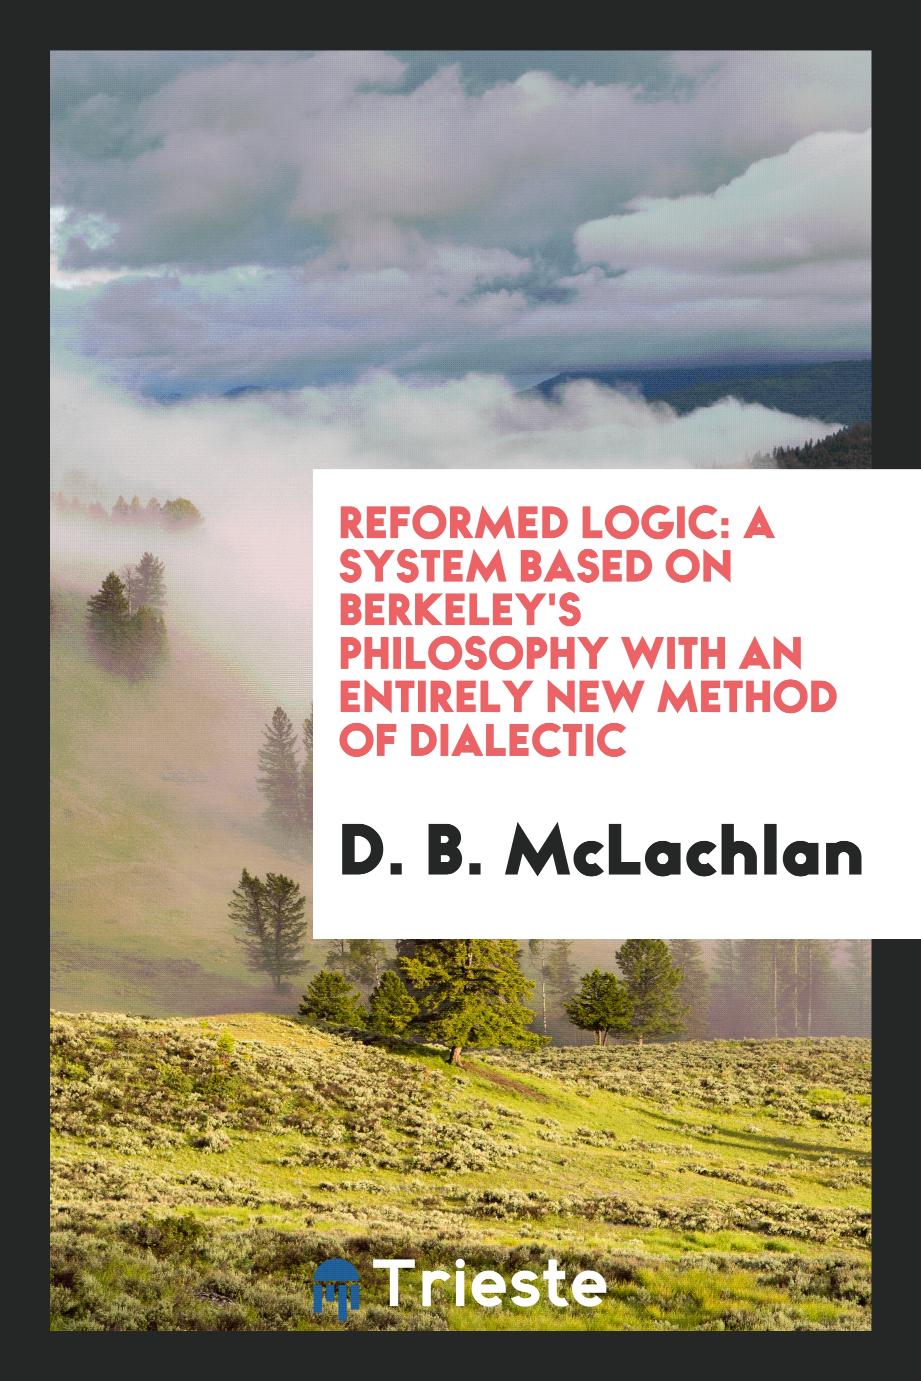 Reformed logic: a system based on Berkeley's philosophy with an entirely new method of dialectic